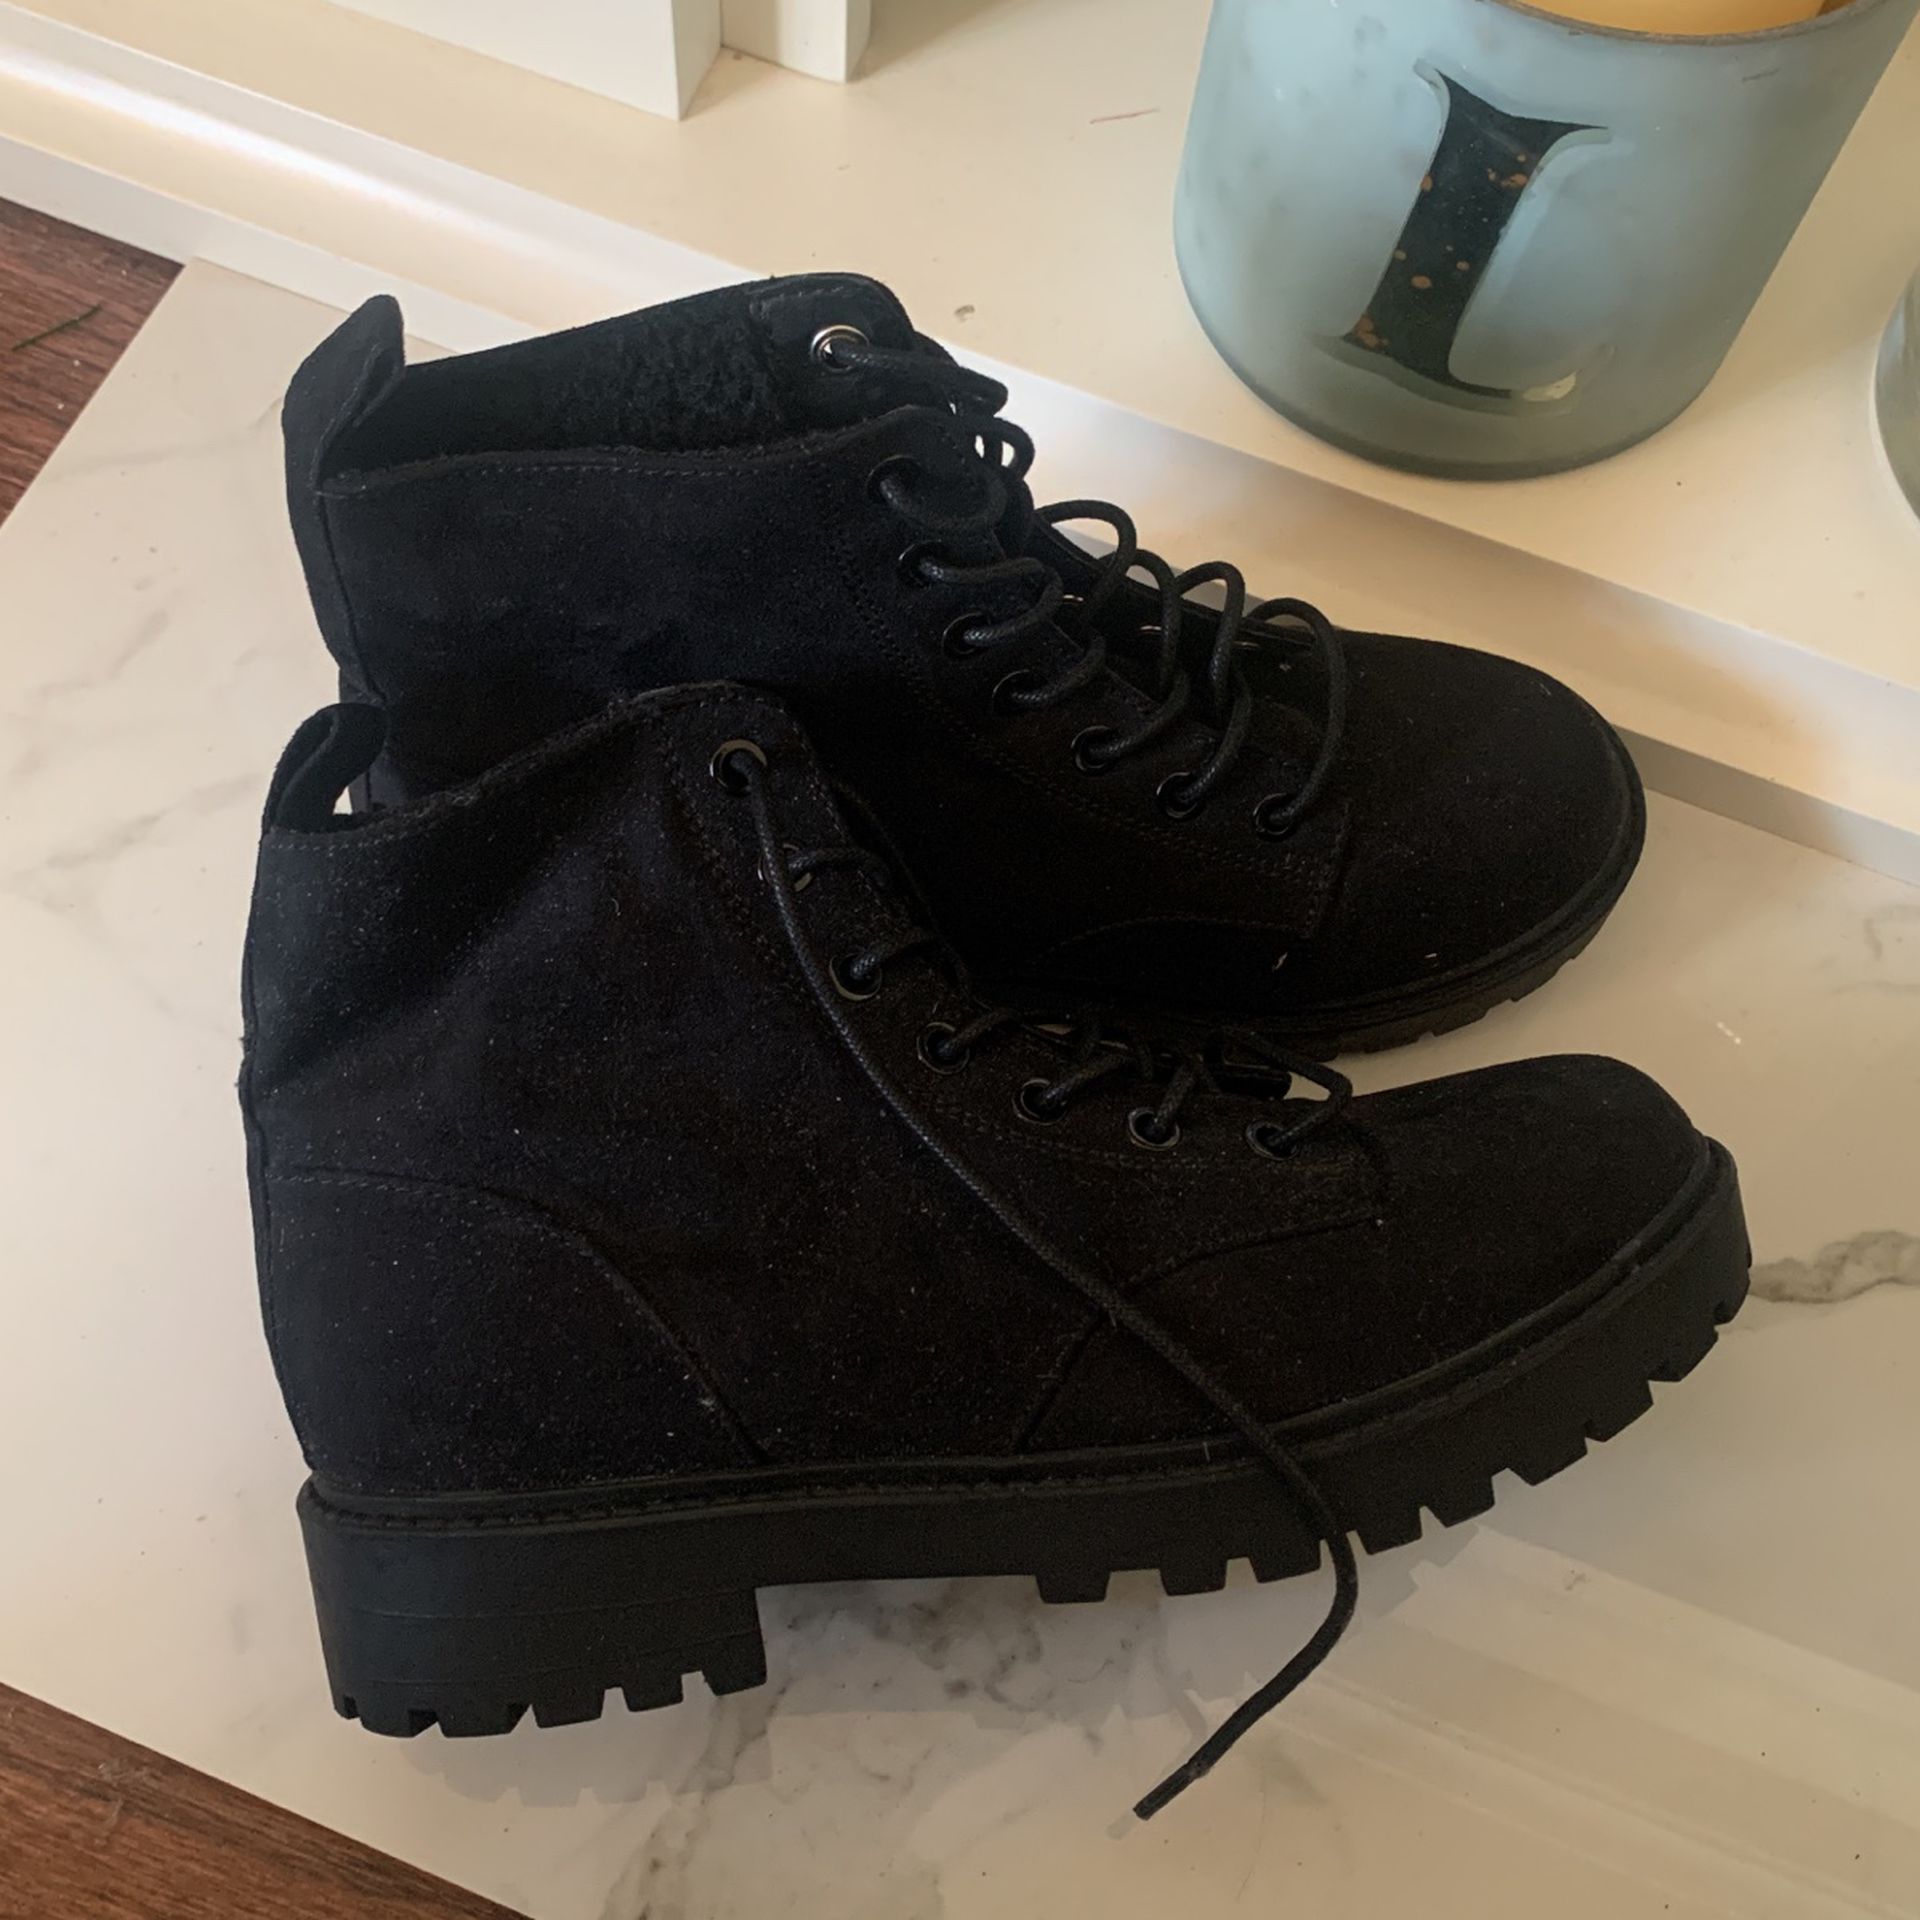 BRAND NEW WOMENS BOOTS -SIZE 37 NEVER WORN